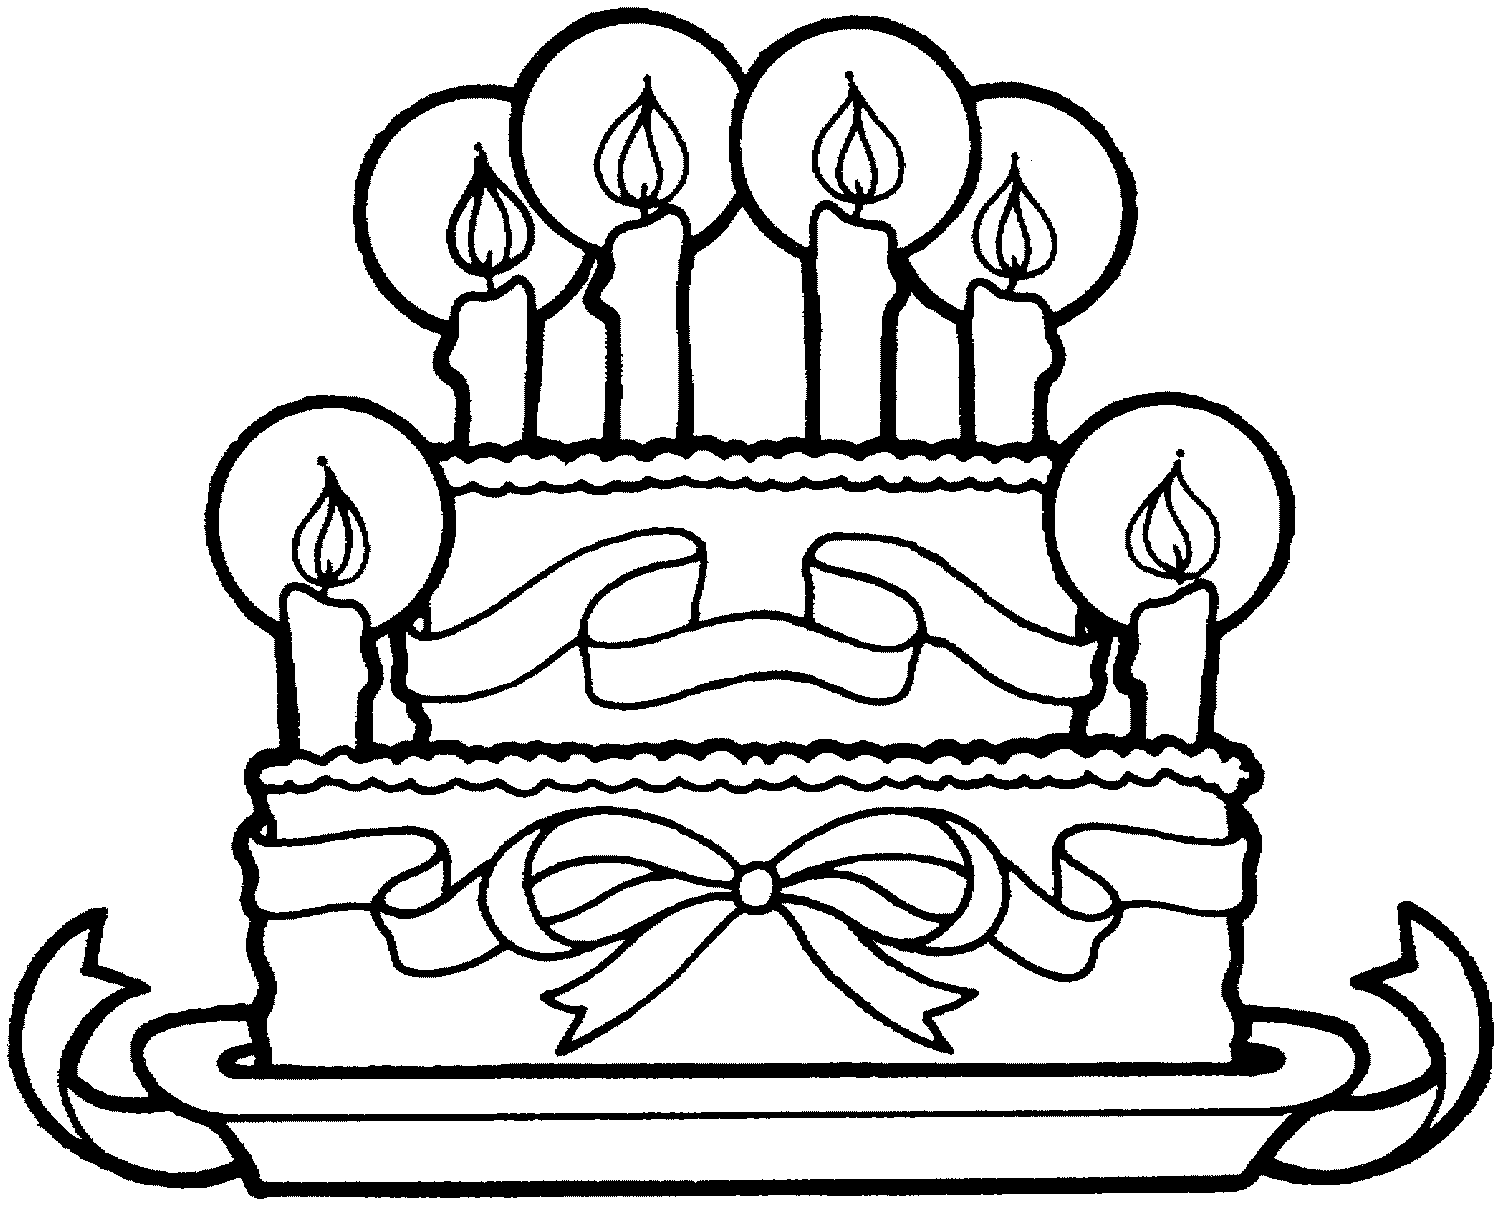 cake coloring page slice of cake drawing at getdrawings free download cake page coloring 